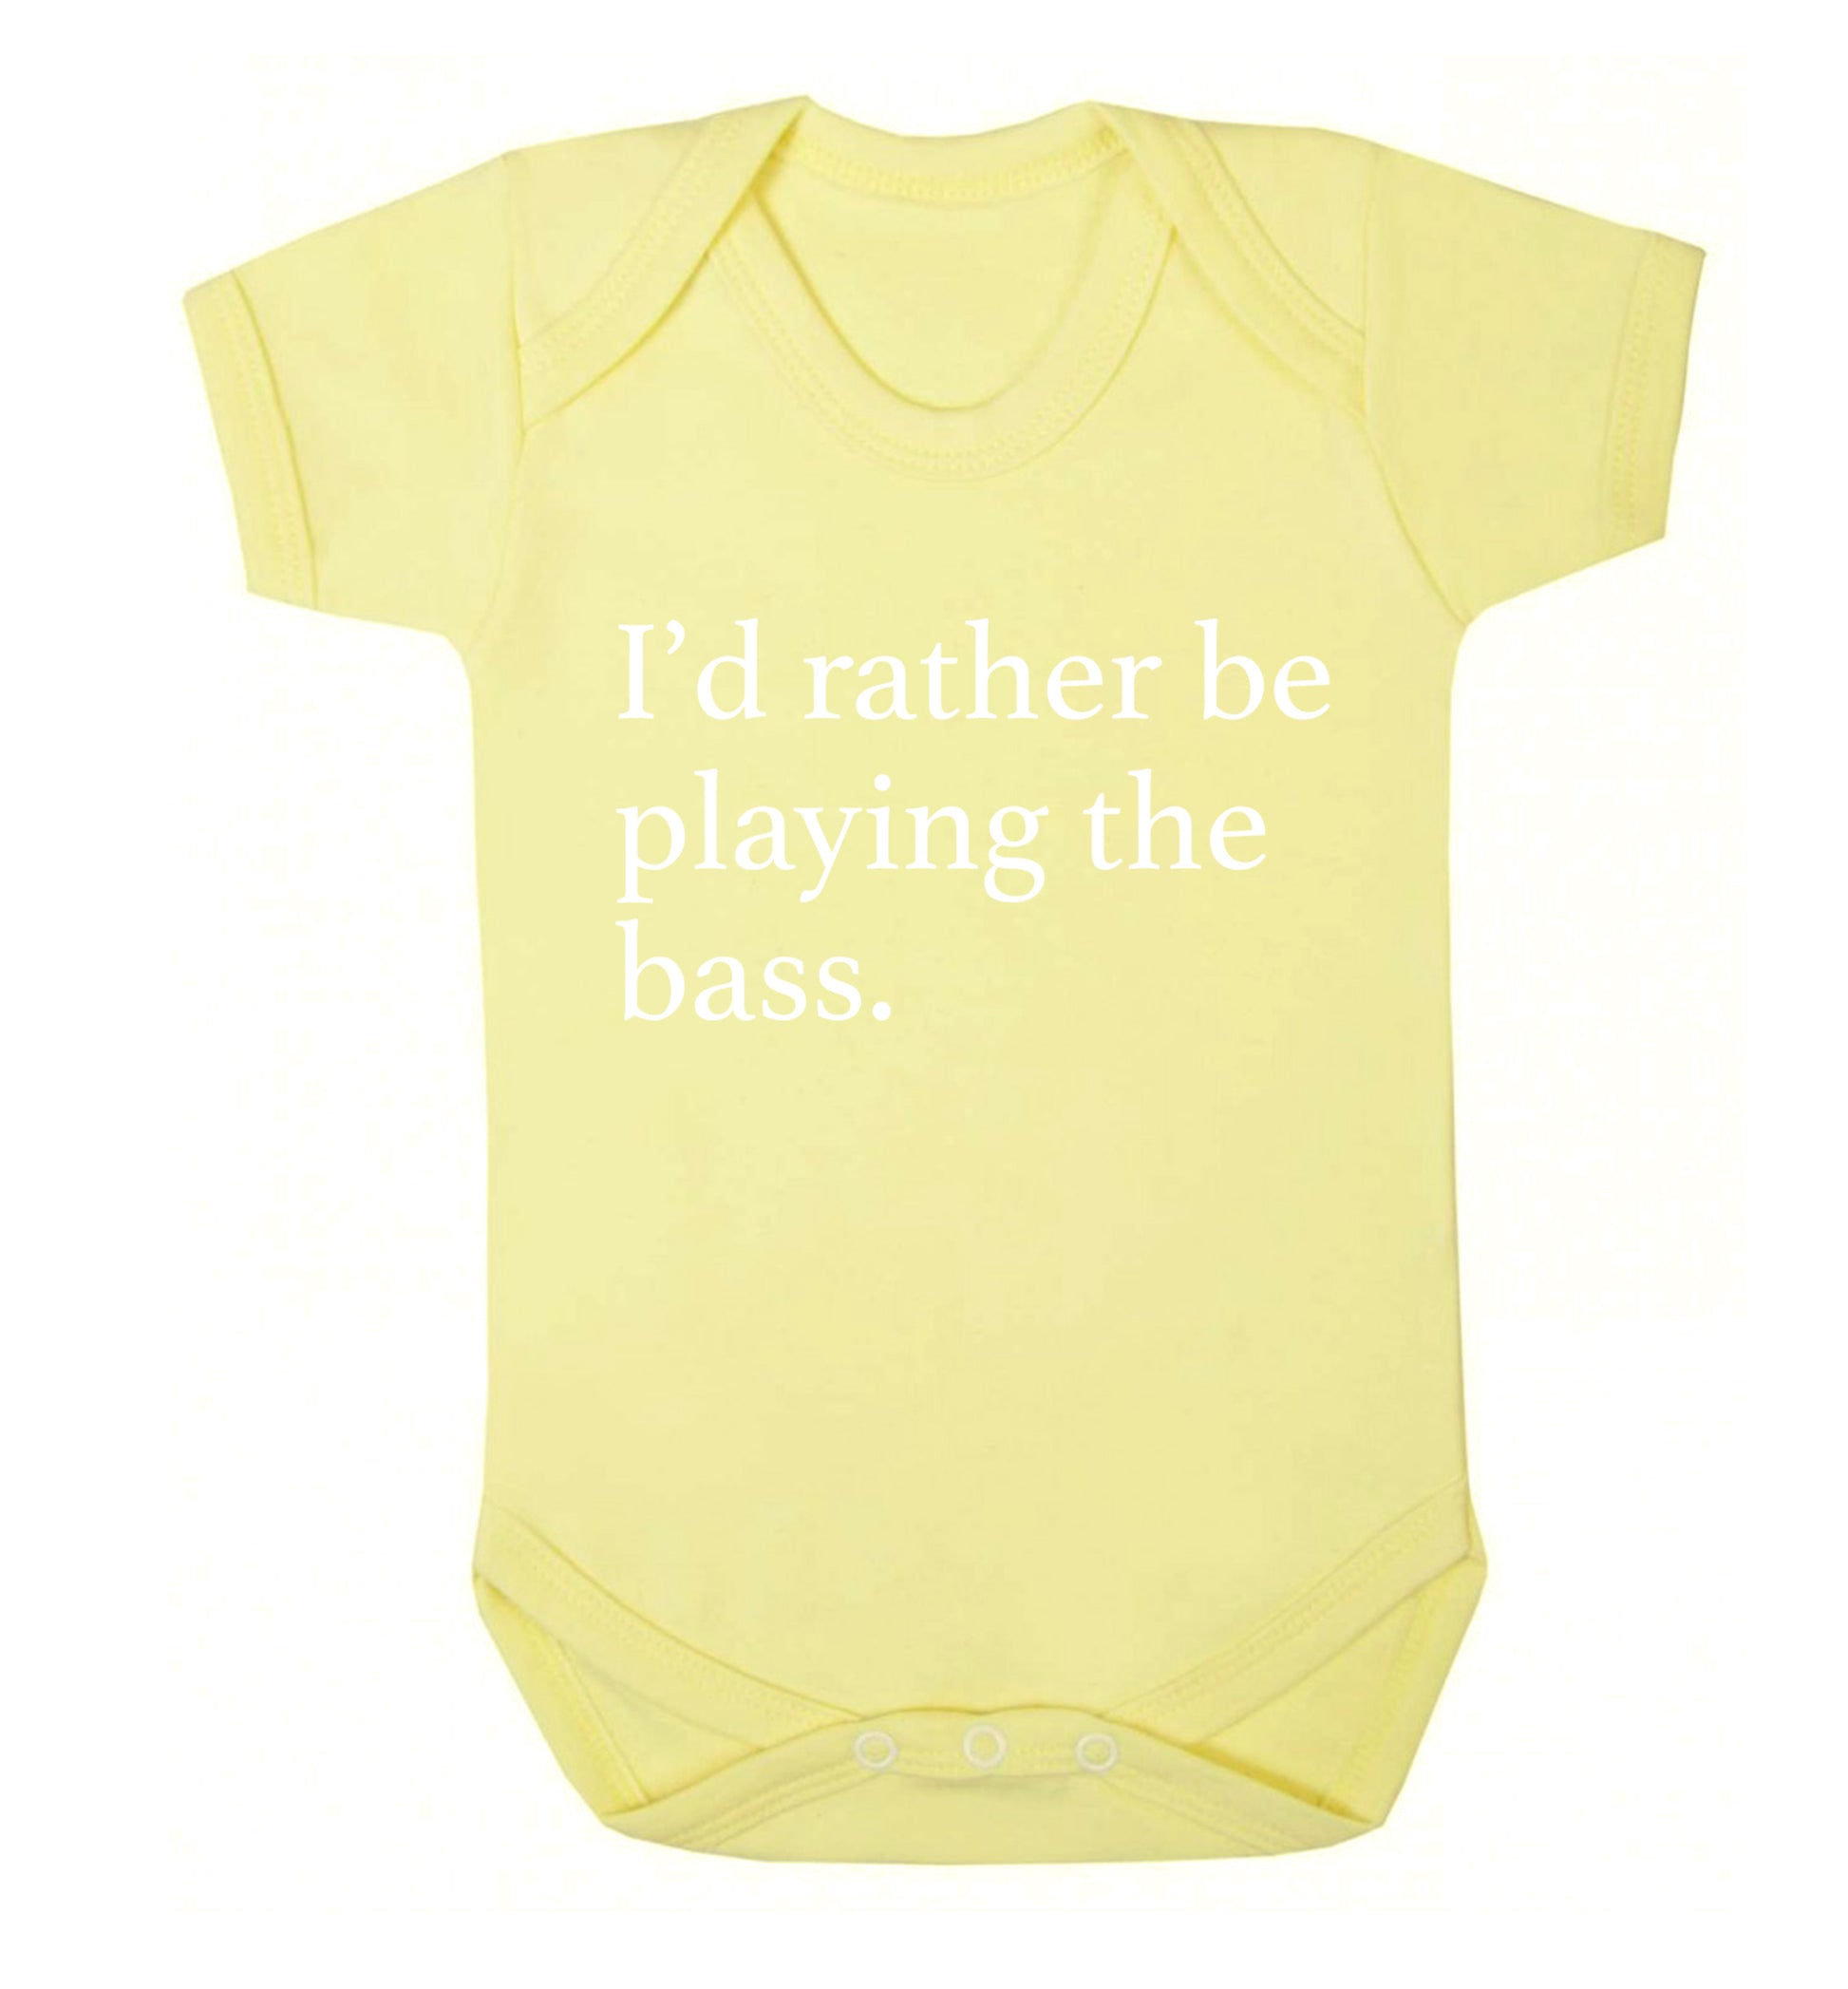 I'd rather by playing the bass Baby Vest pale yellow 18-24 months